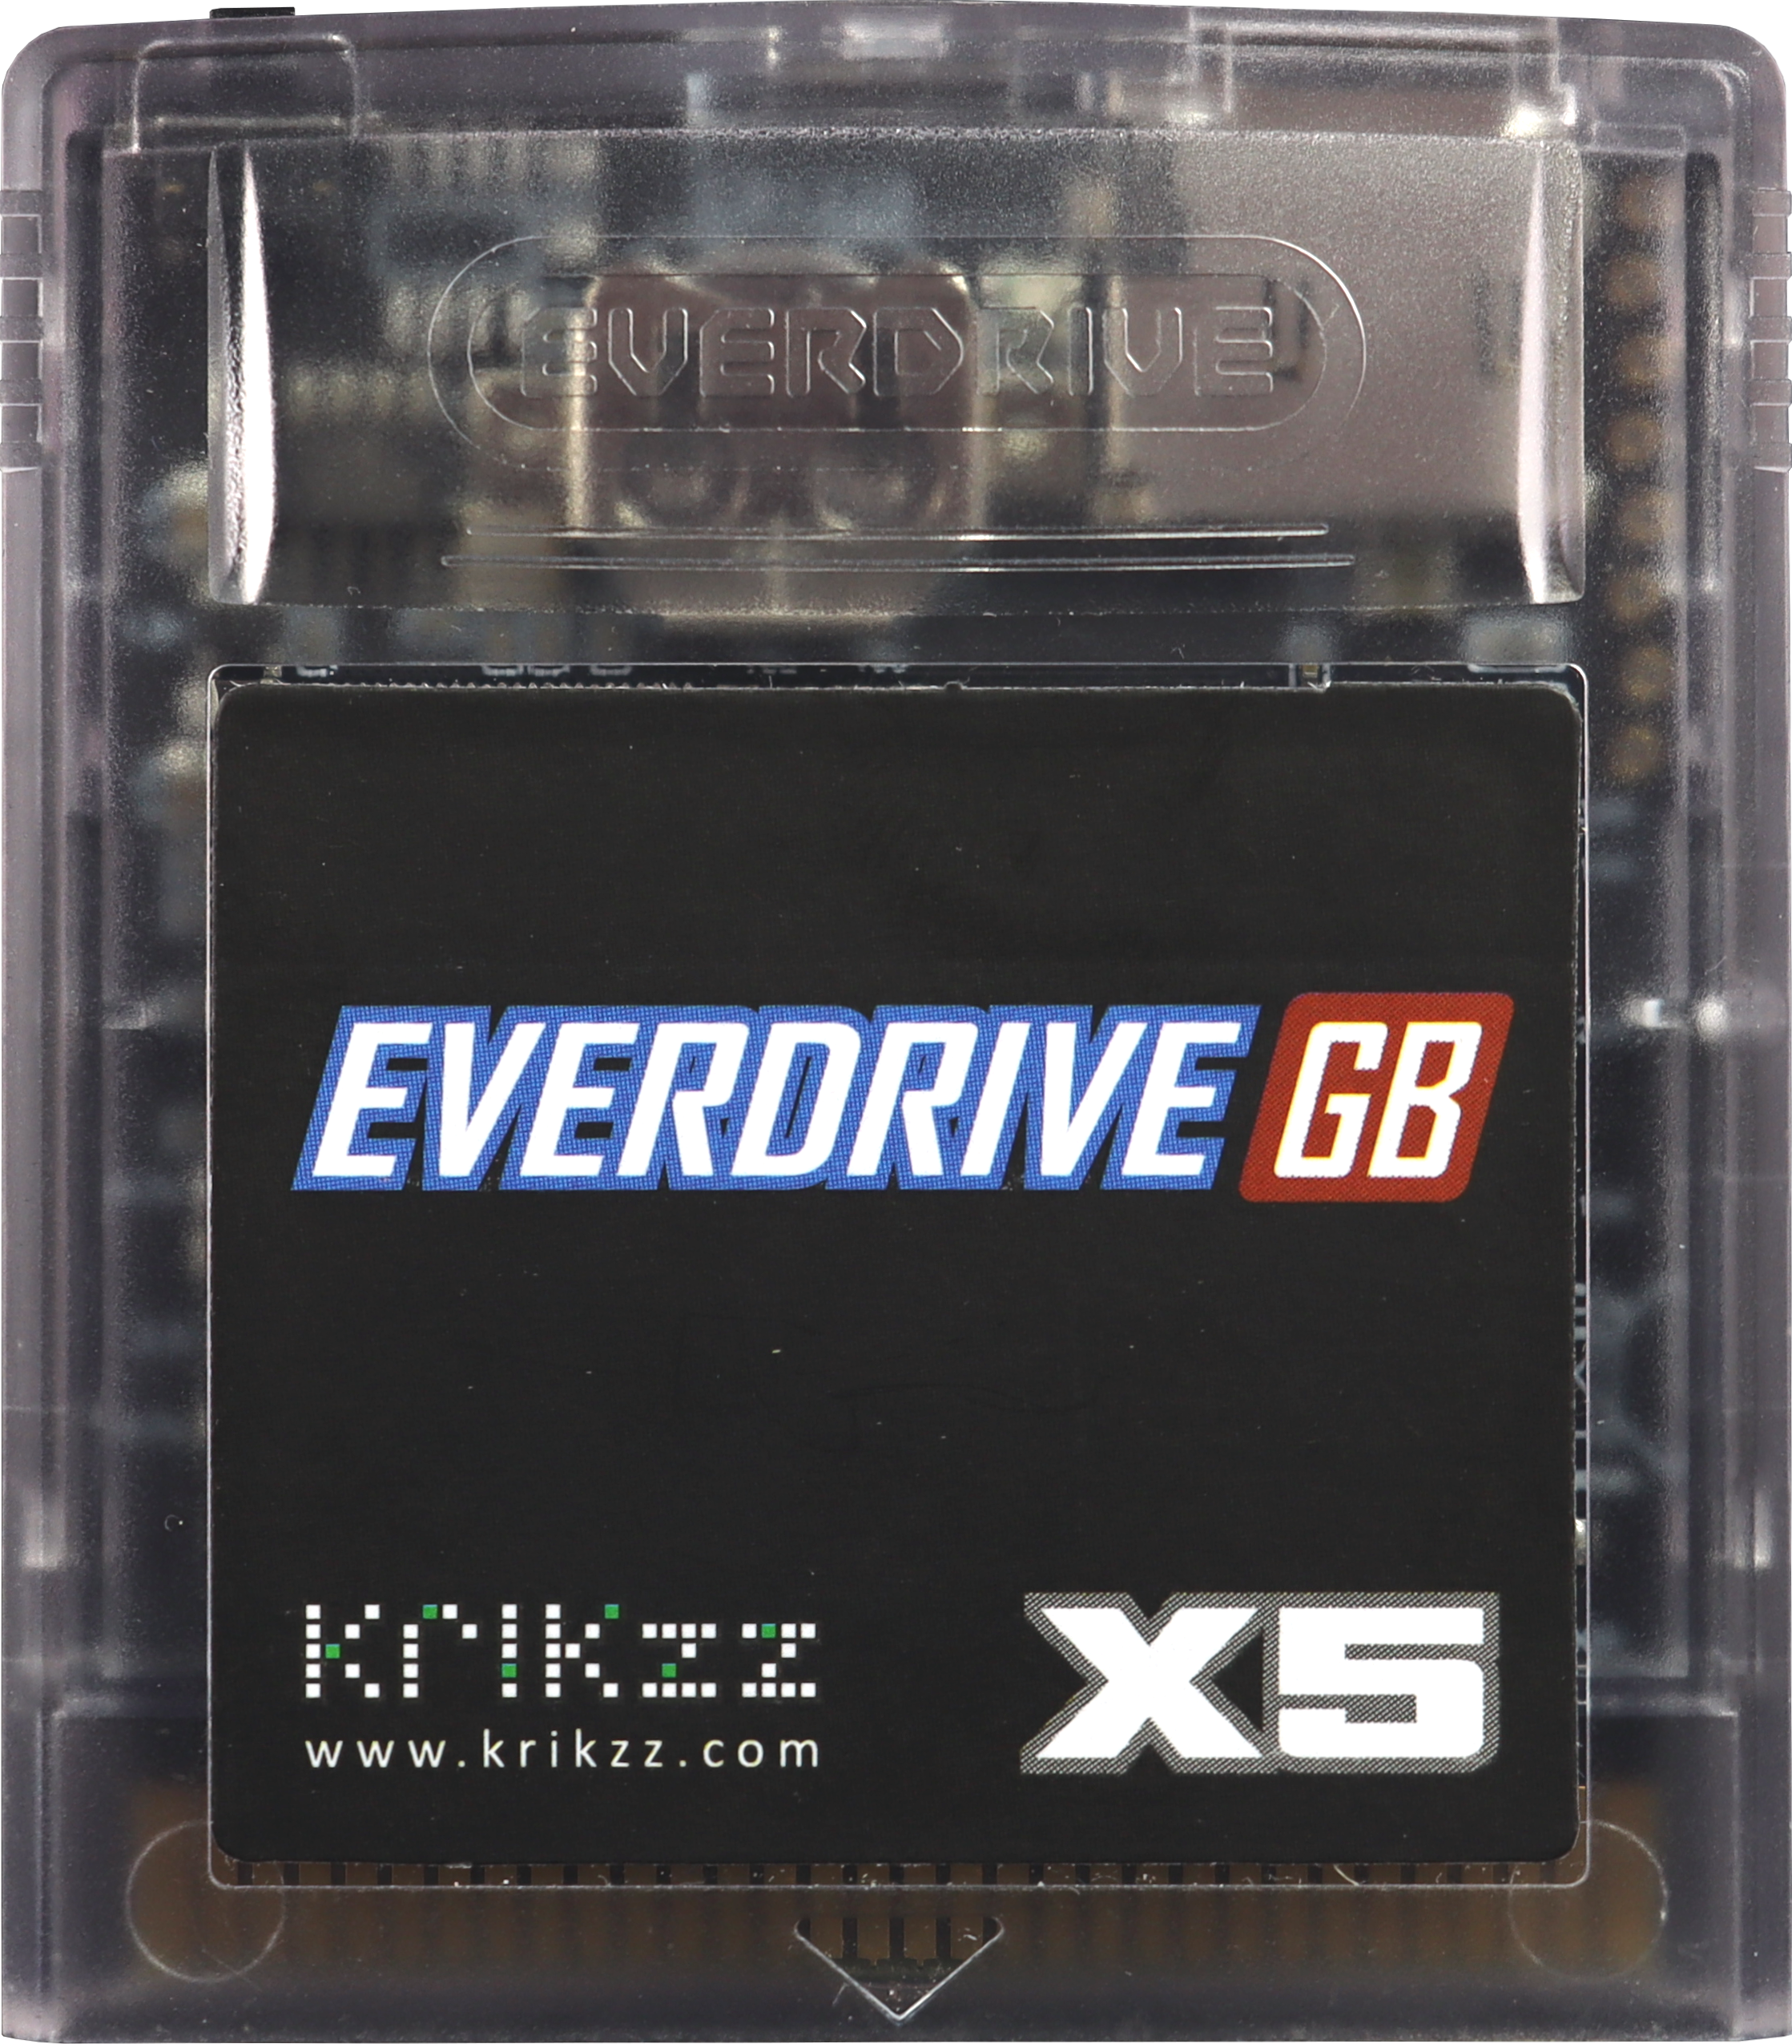 Everdrive GB X5 - Frosted Clear